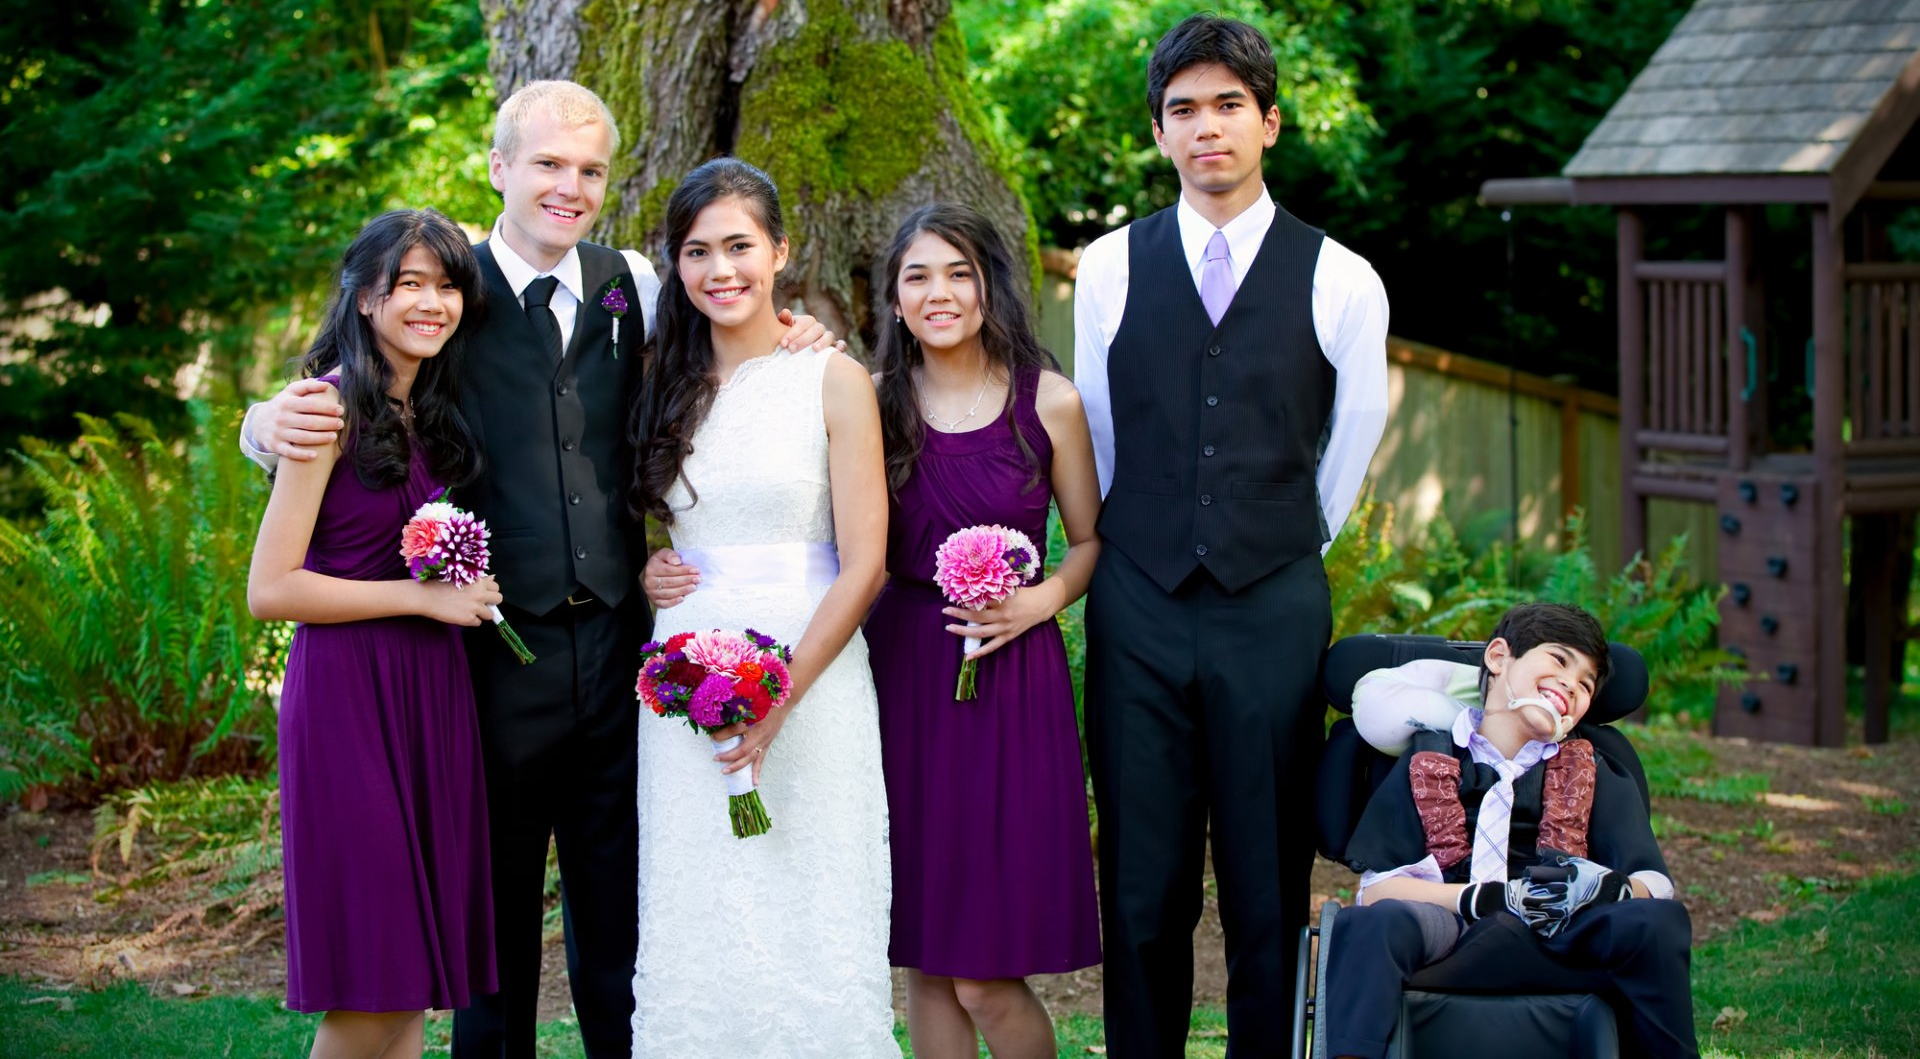 newlyweds pose for photo with family and brother with wheelchair